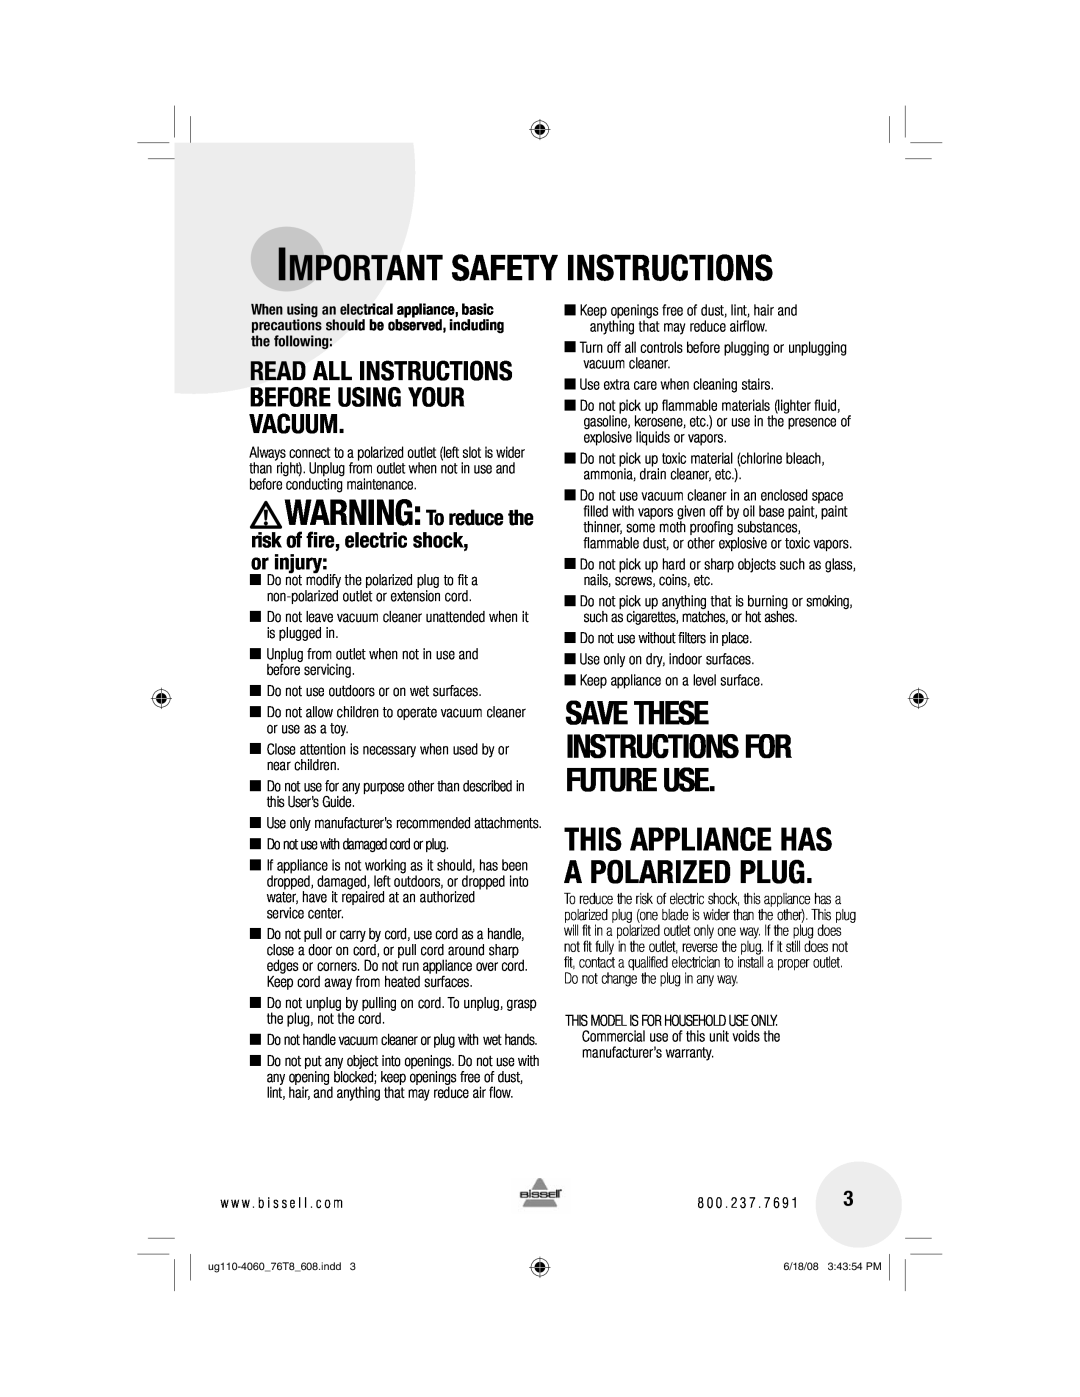 Bissell 76T8 warranty or injury, Important Safety Instructions, This Appliance Has A Polarized Plug 